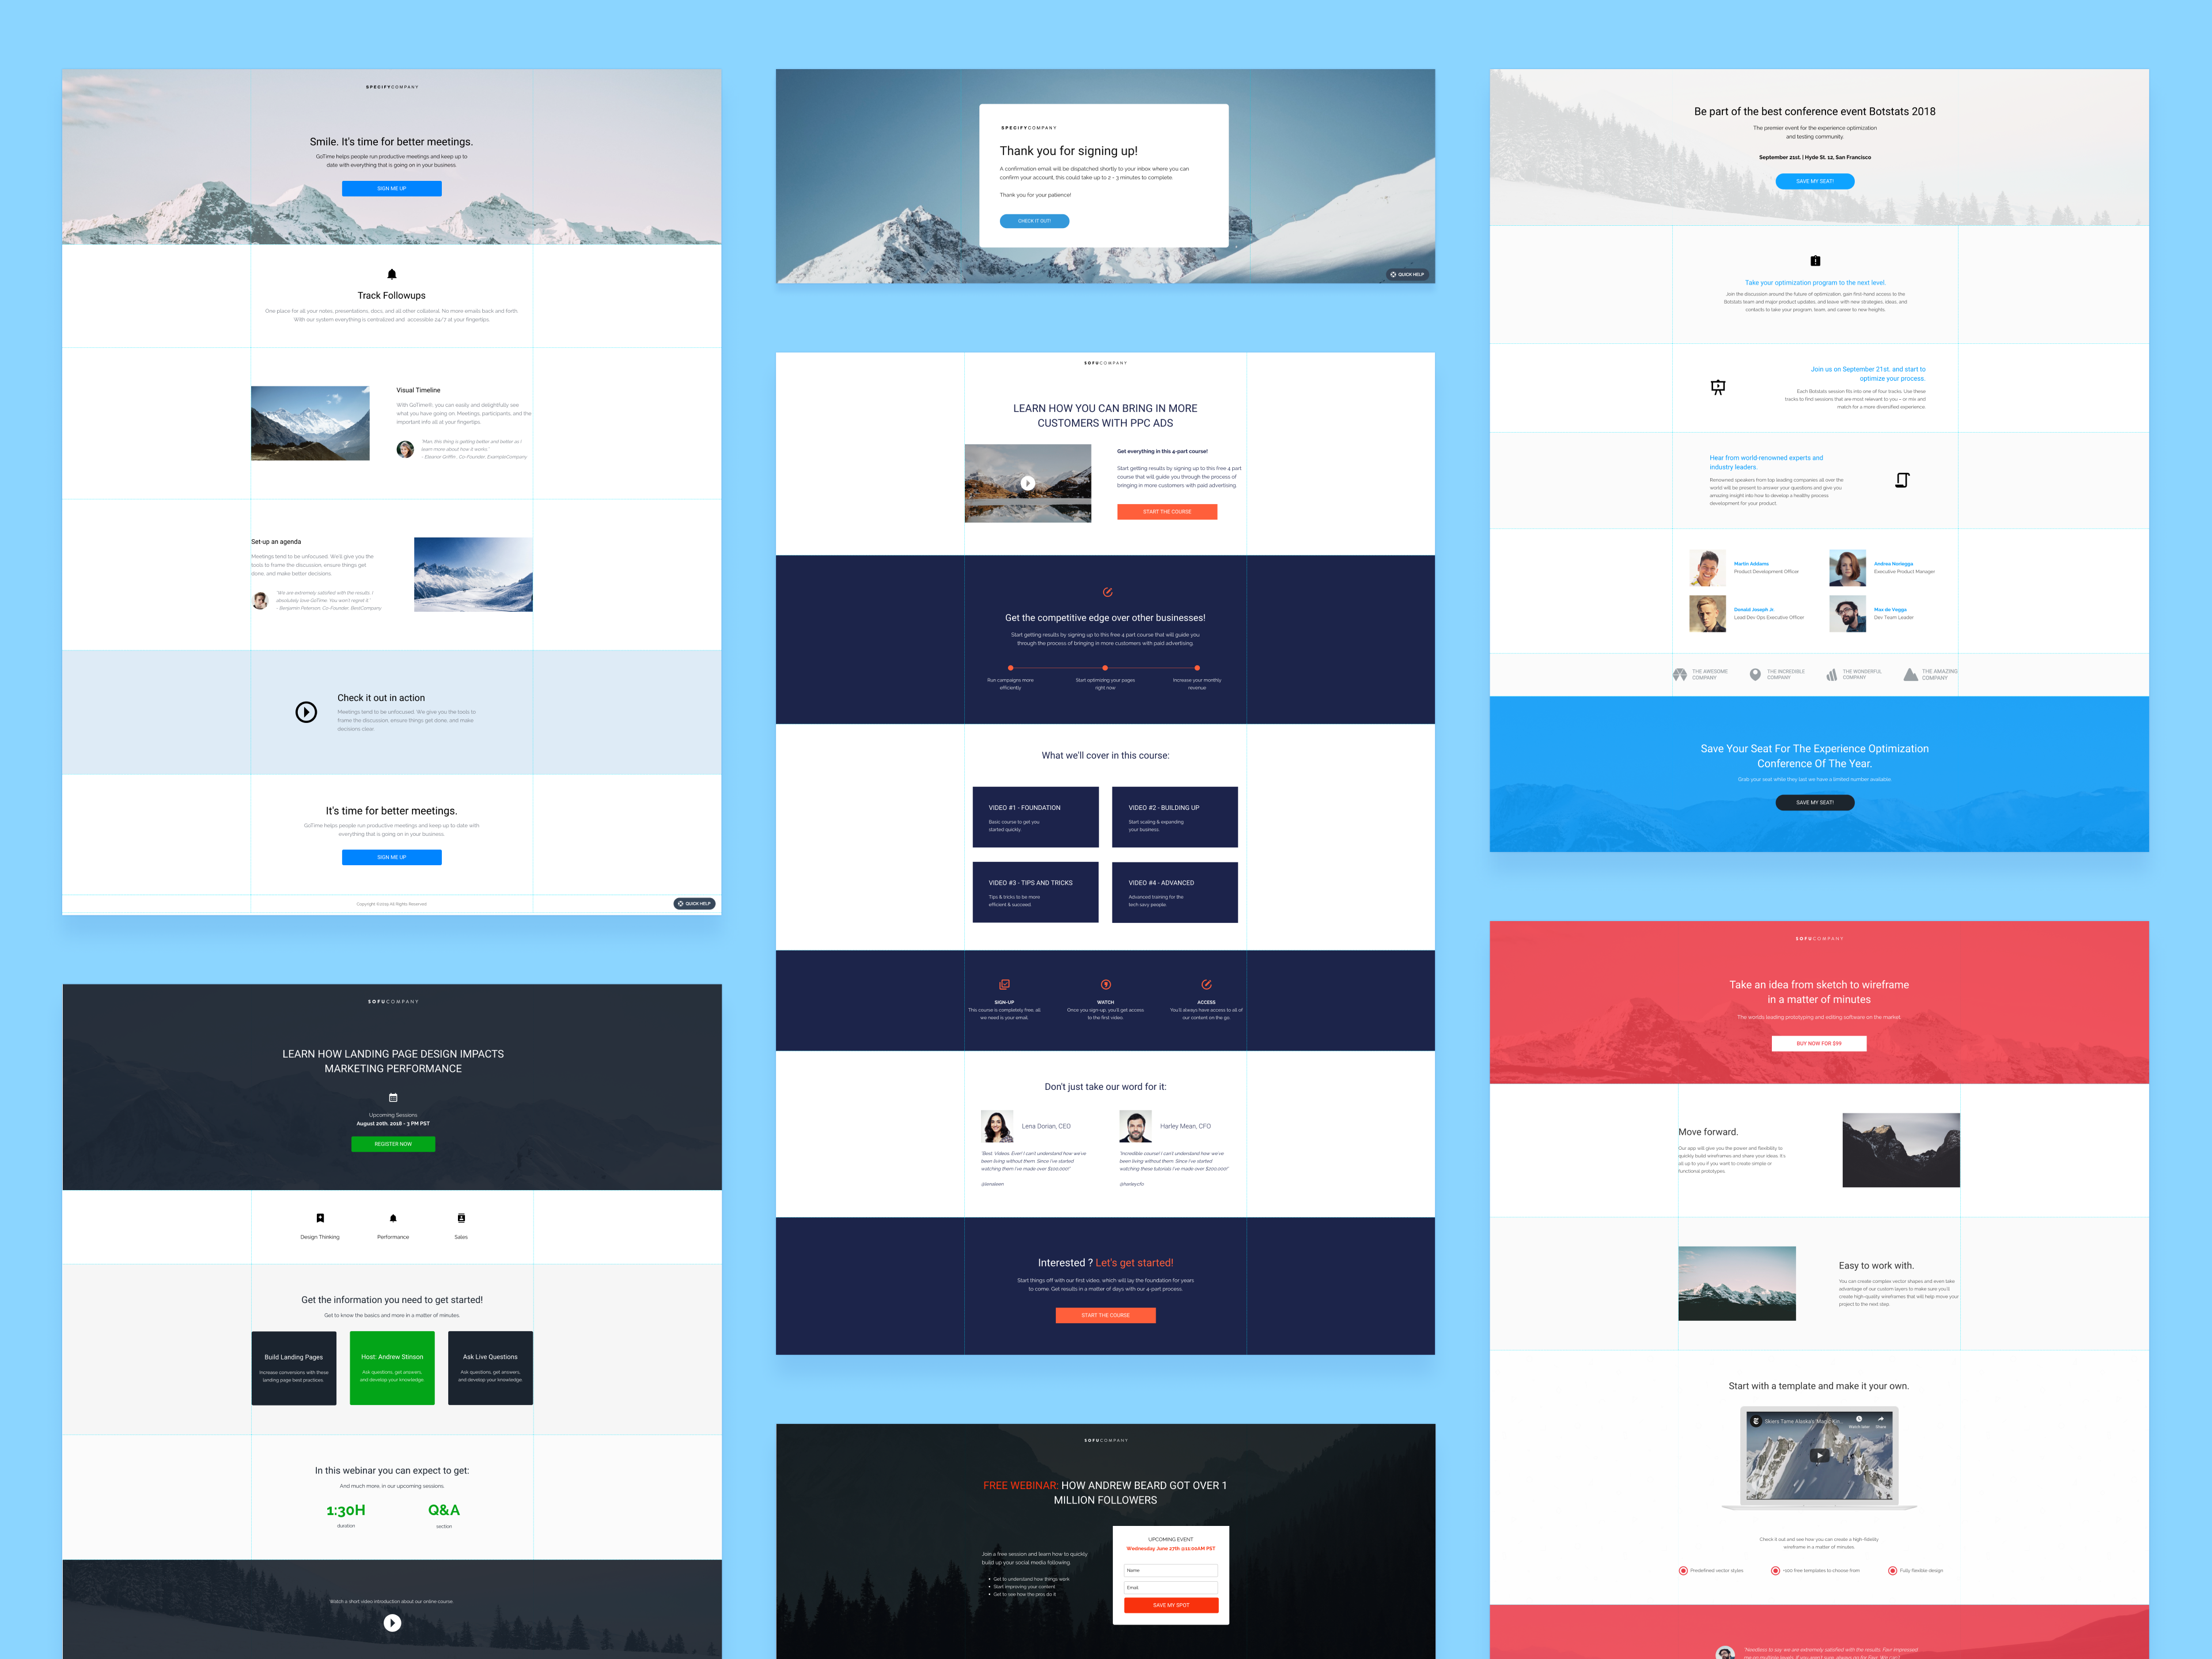 500+ customizable layouts by industry and use case.